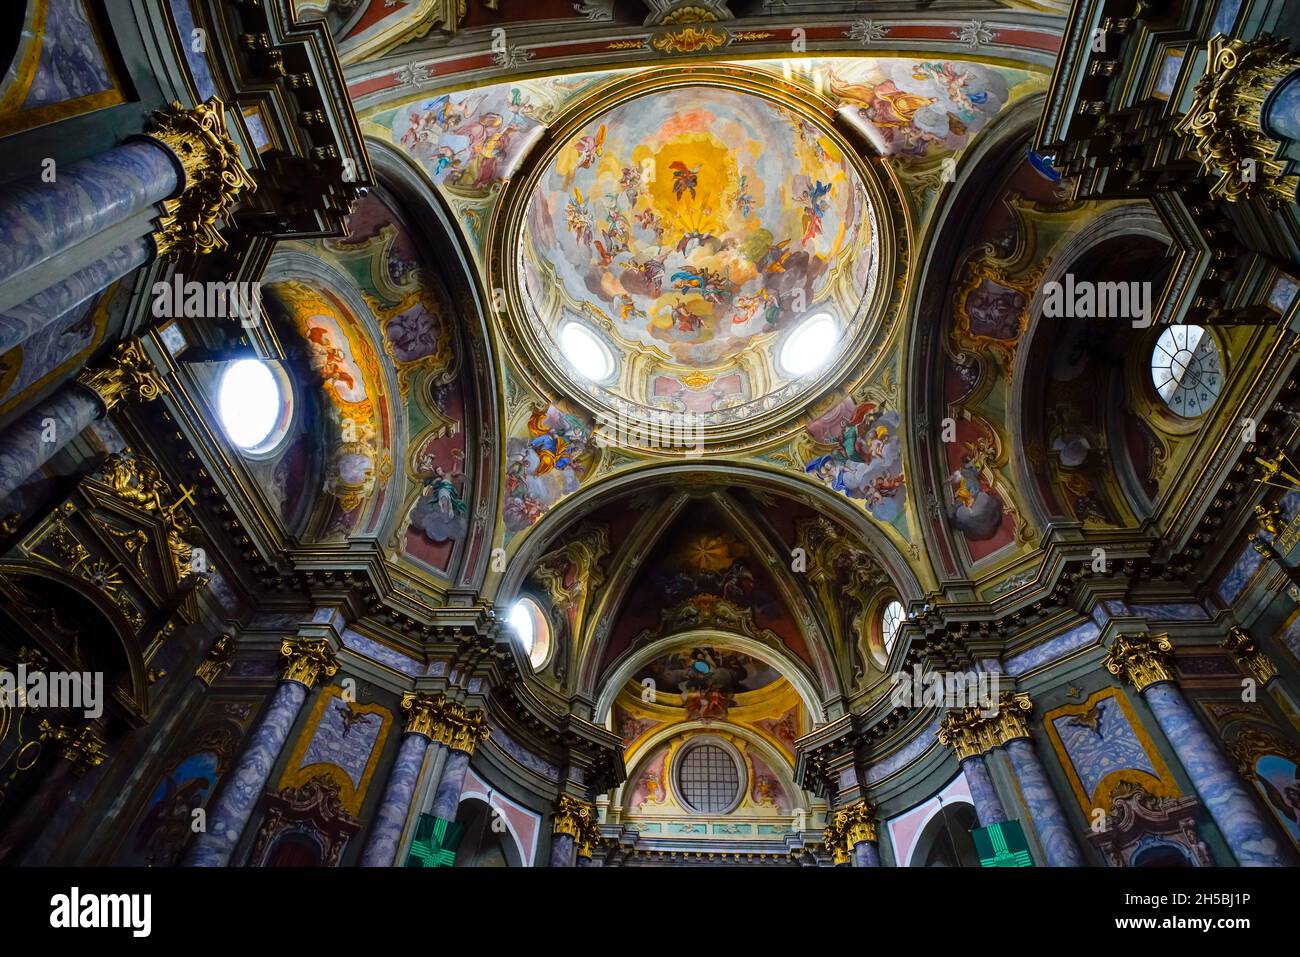 Inside St. Ambrogio church in Cuneo. The Capital city of  Cuneo province, Piedmont region, Italy. The  Dome decorated by a painting realised by Michel Stock Photo